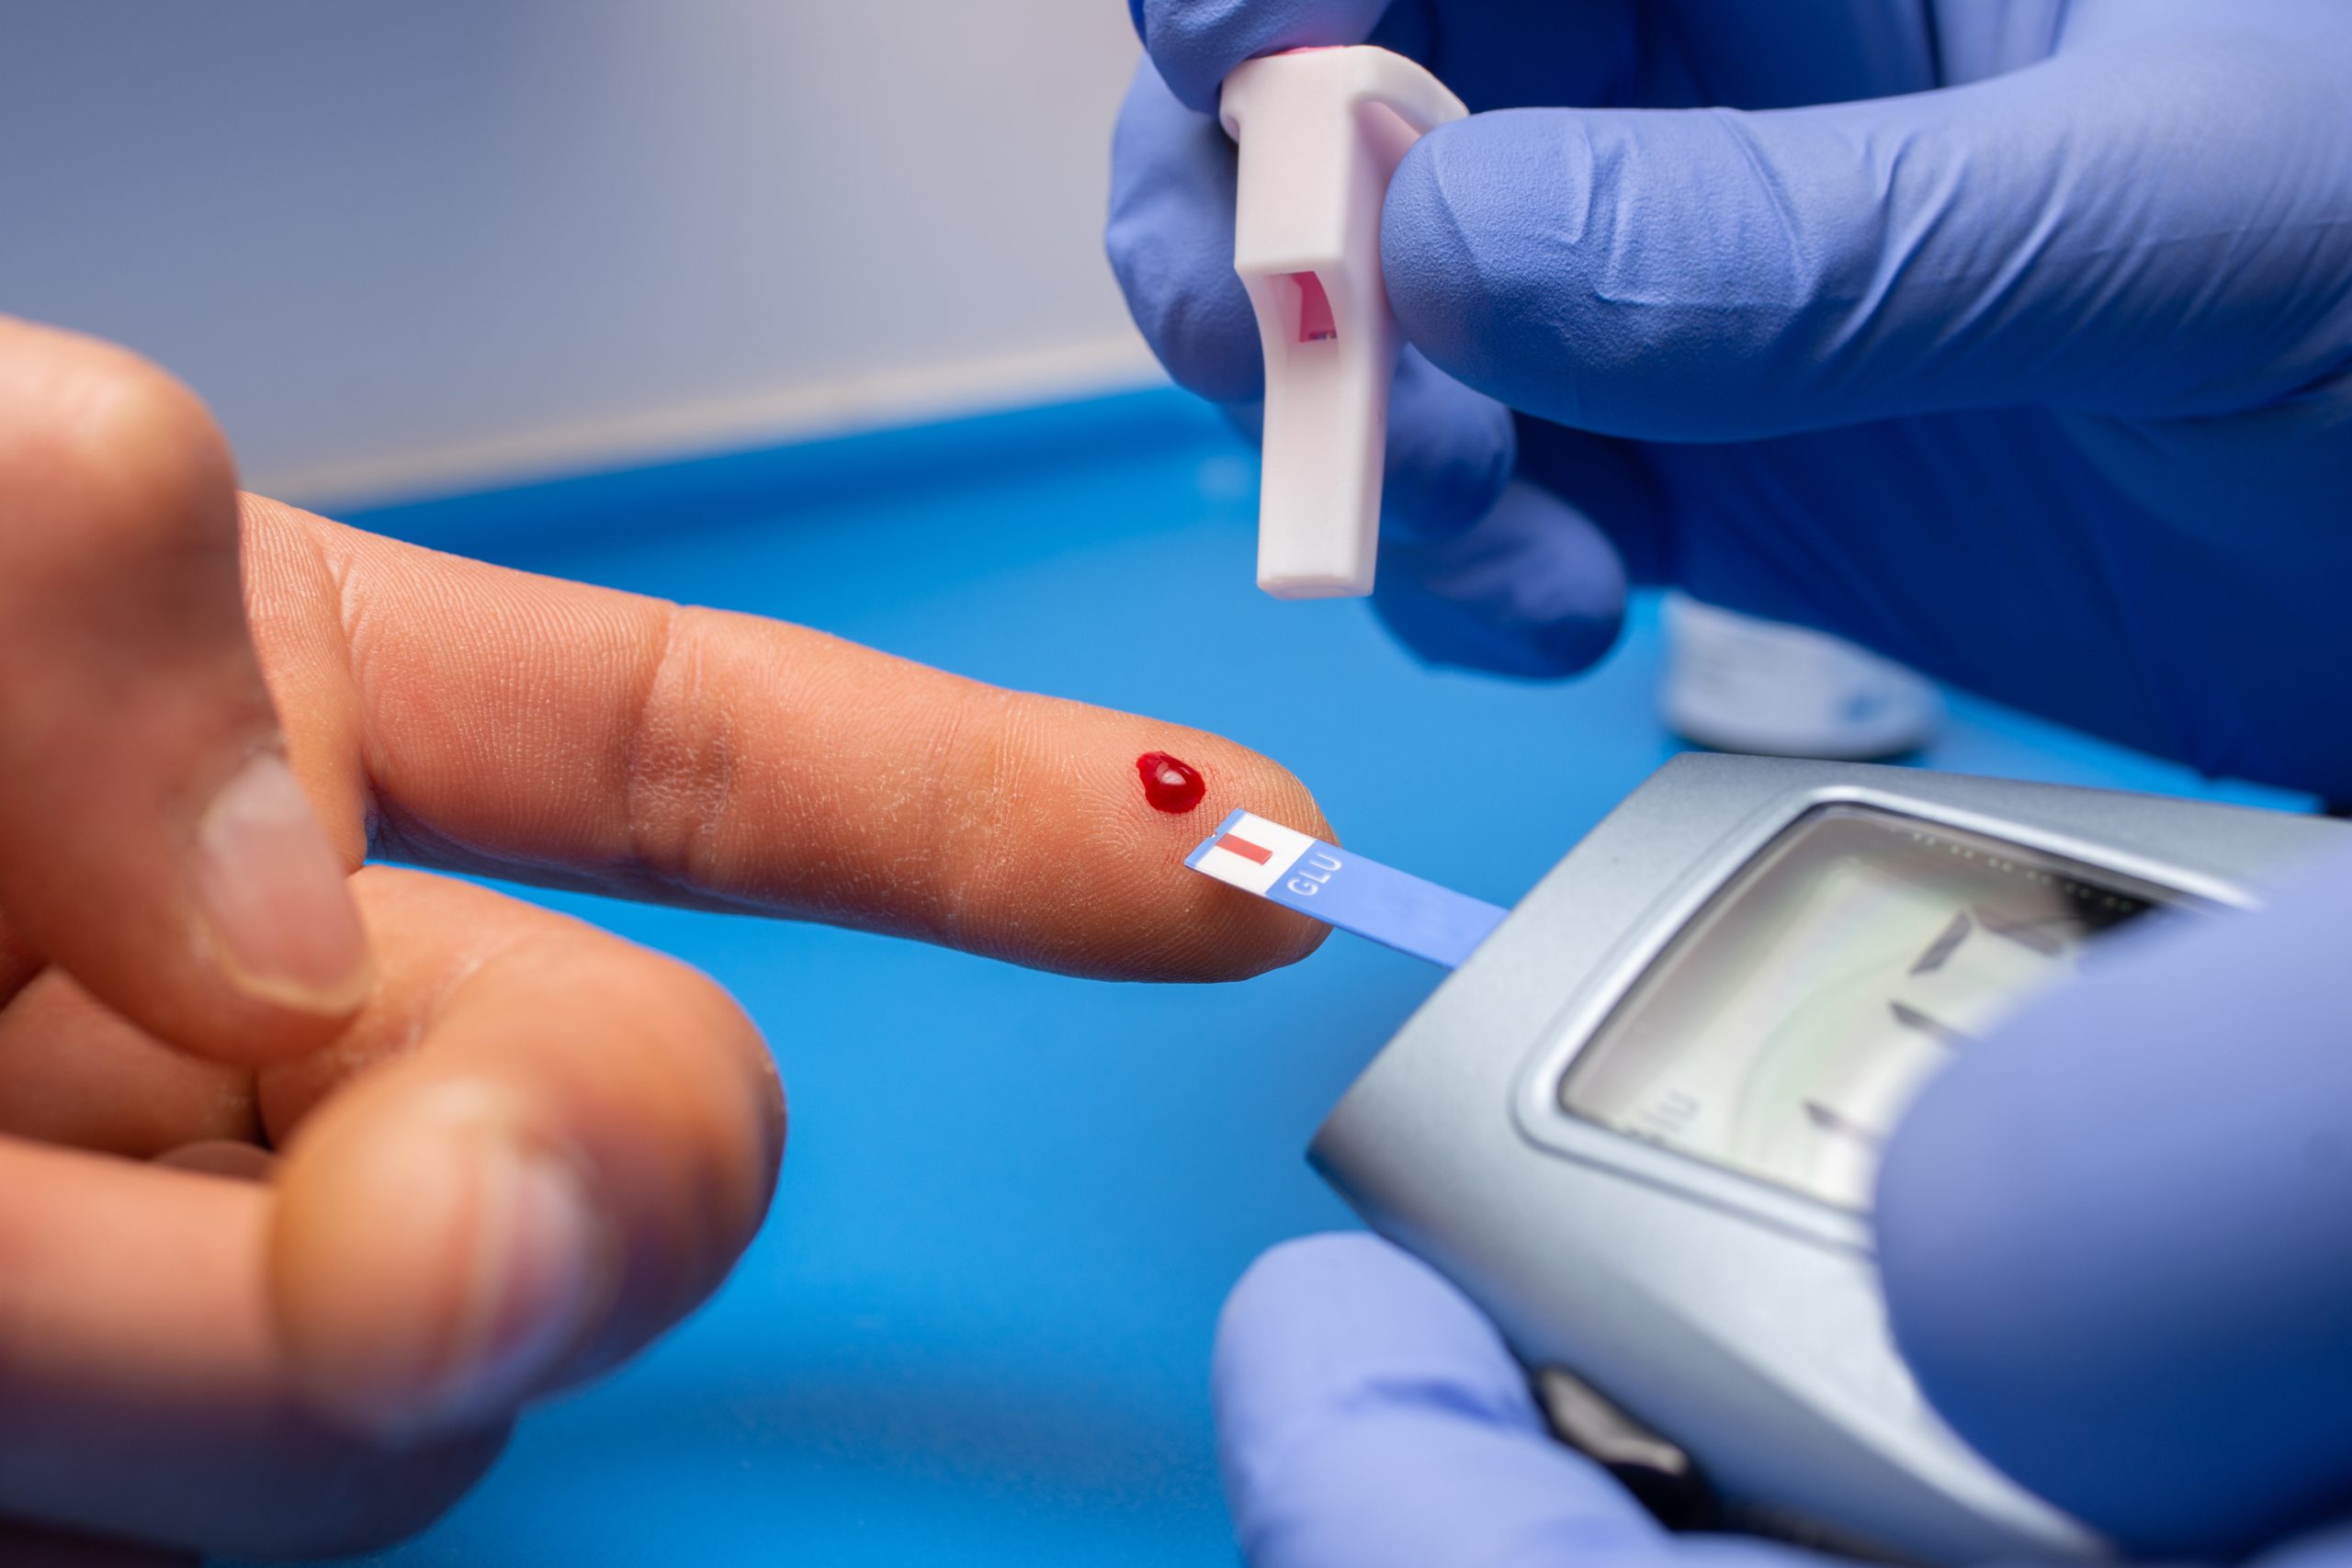 Type 2 Diabetes at 30s can Reduce Life Expectancy by 14 Years